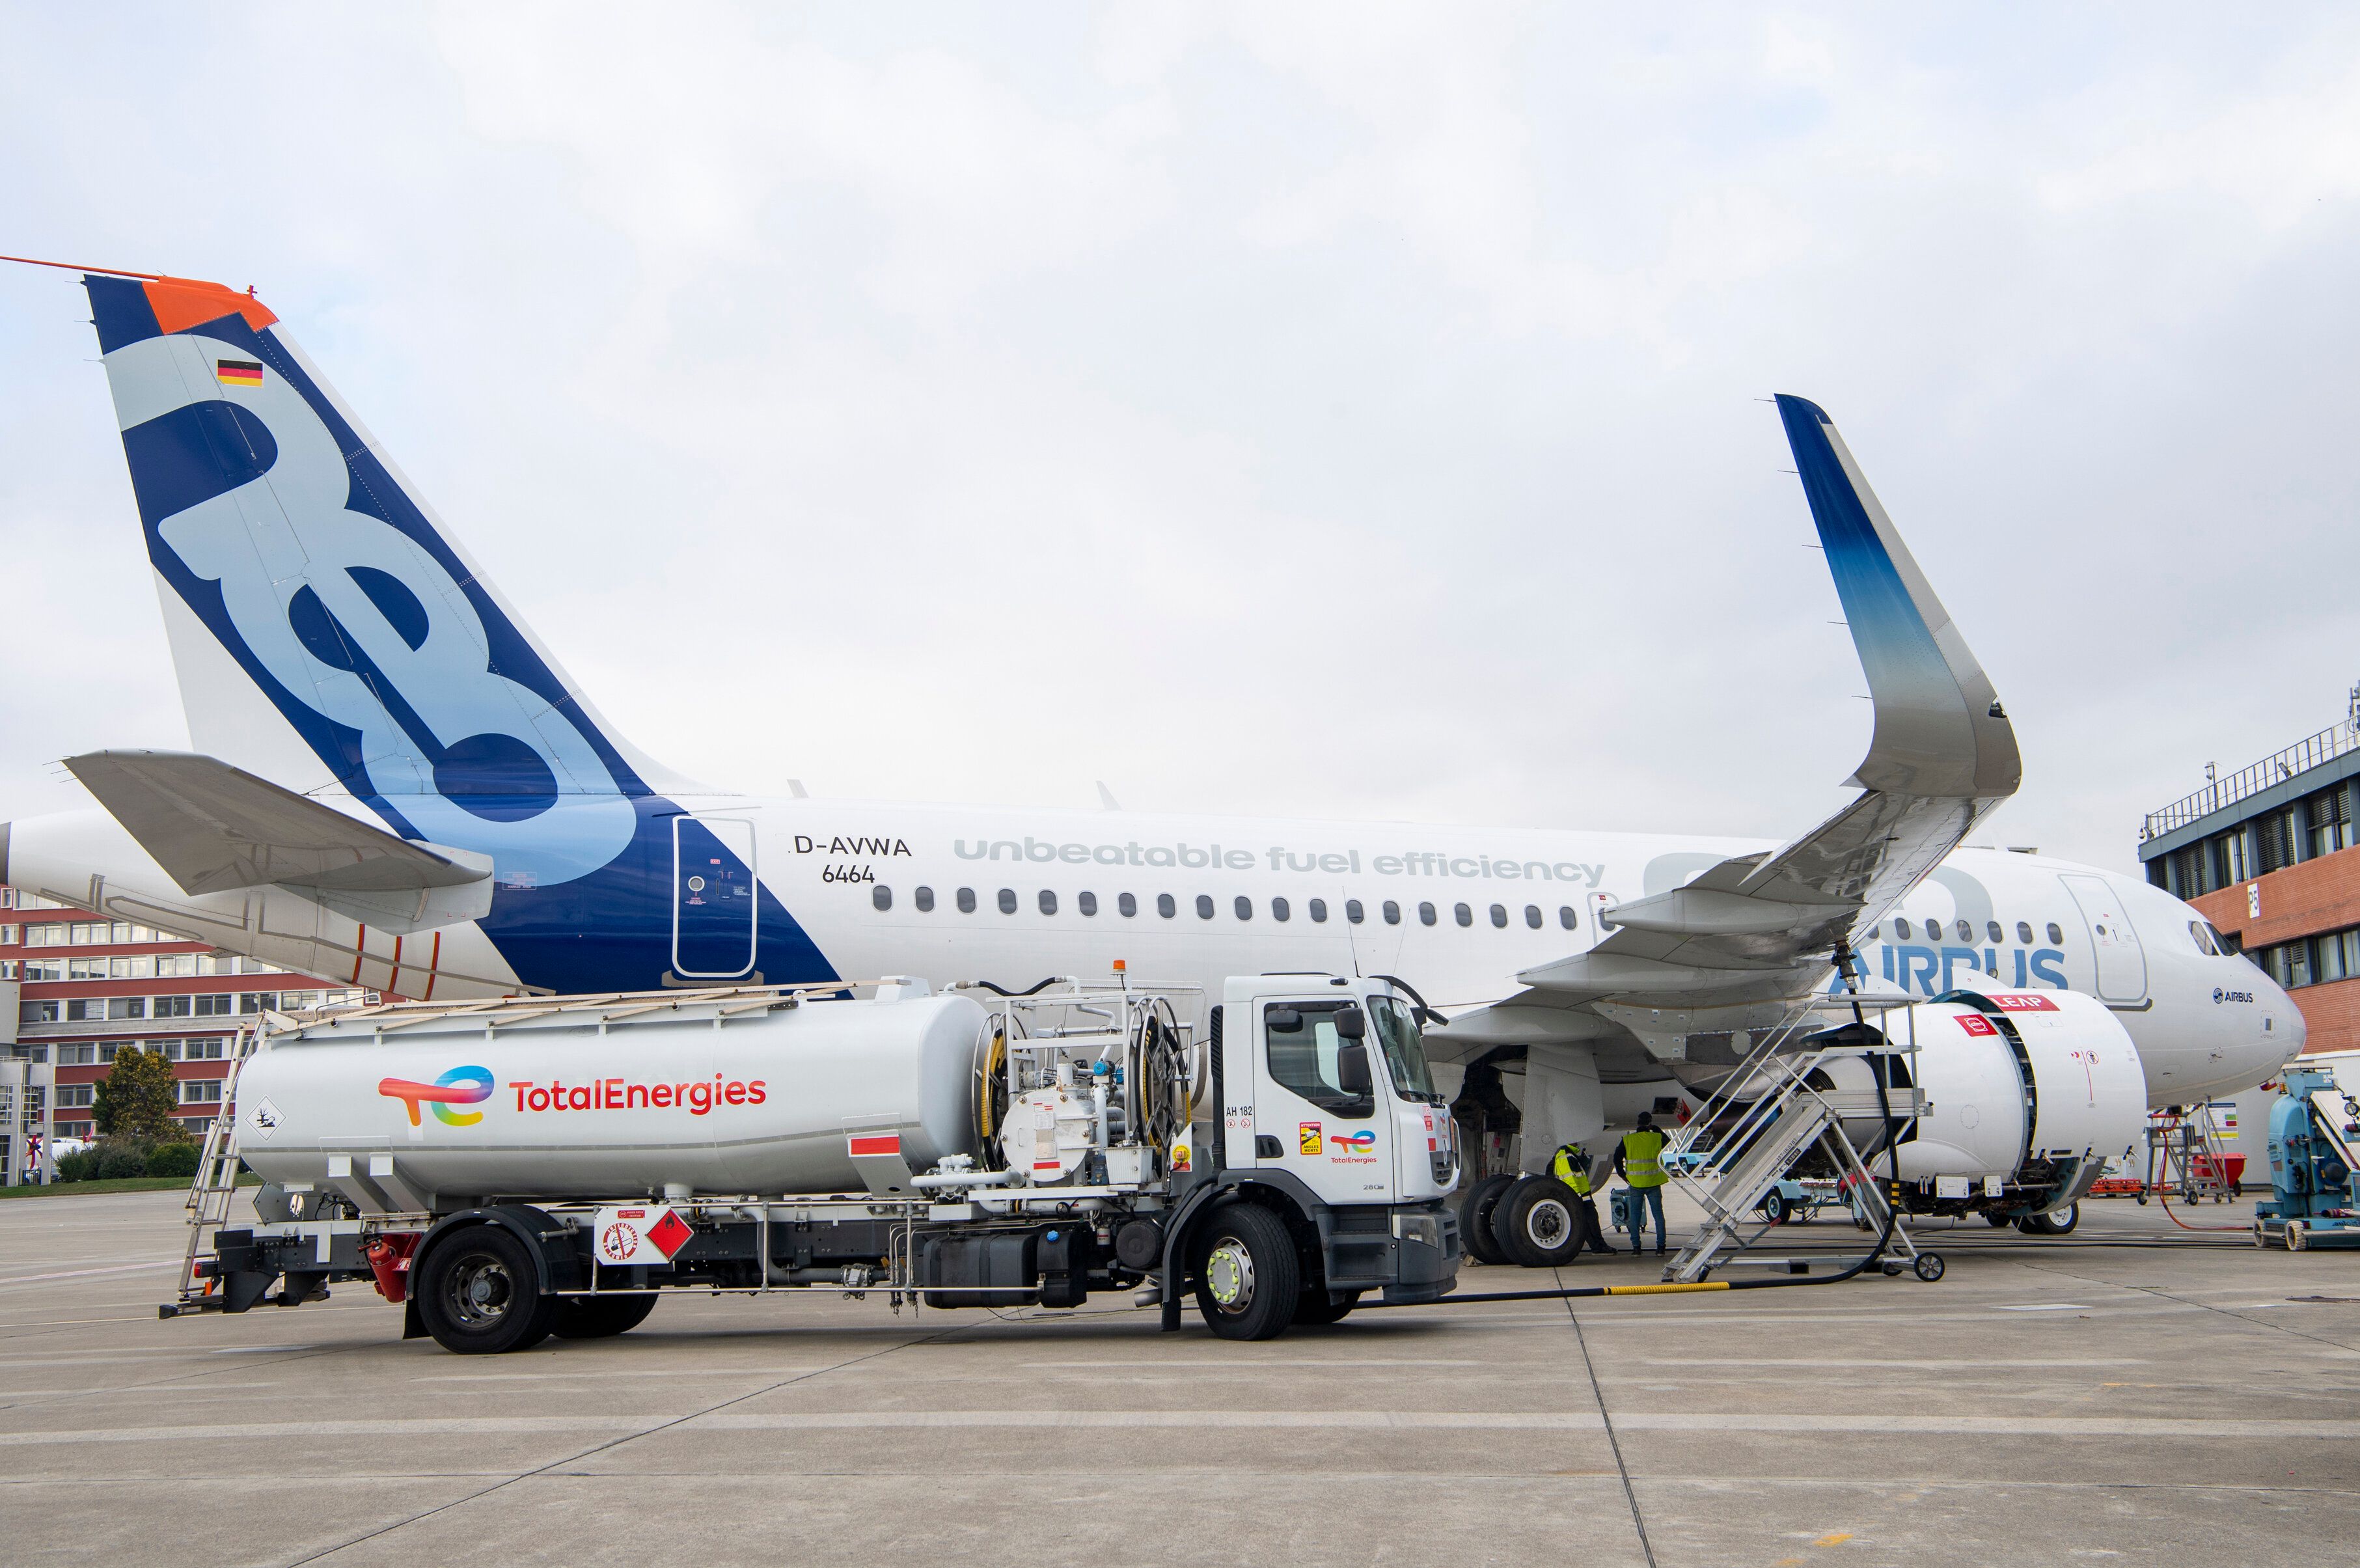 Airbus A319neo being refueled at airport 